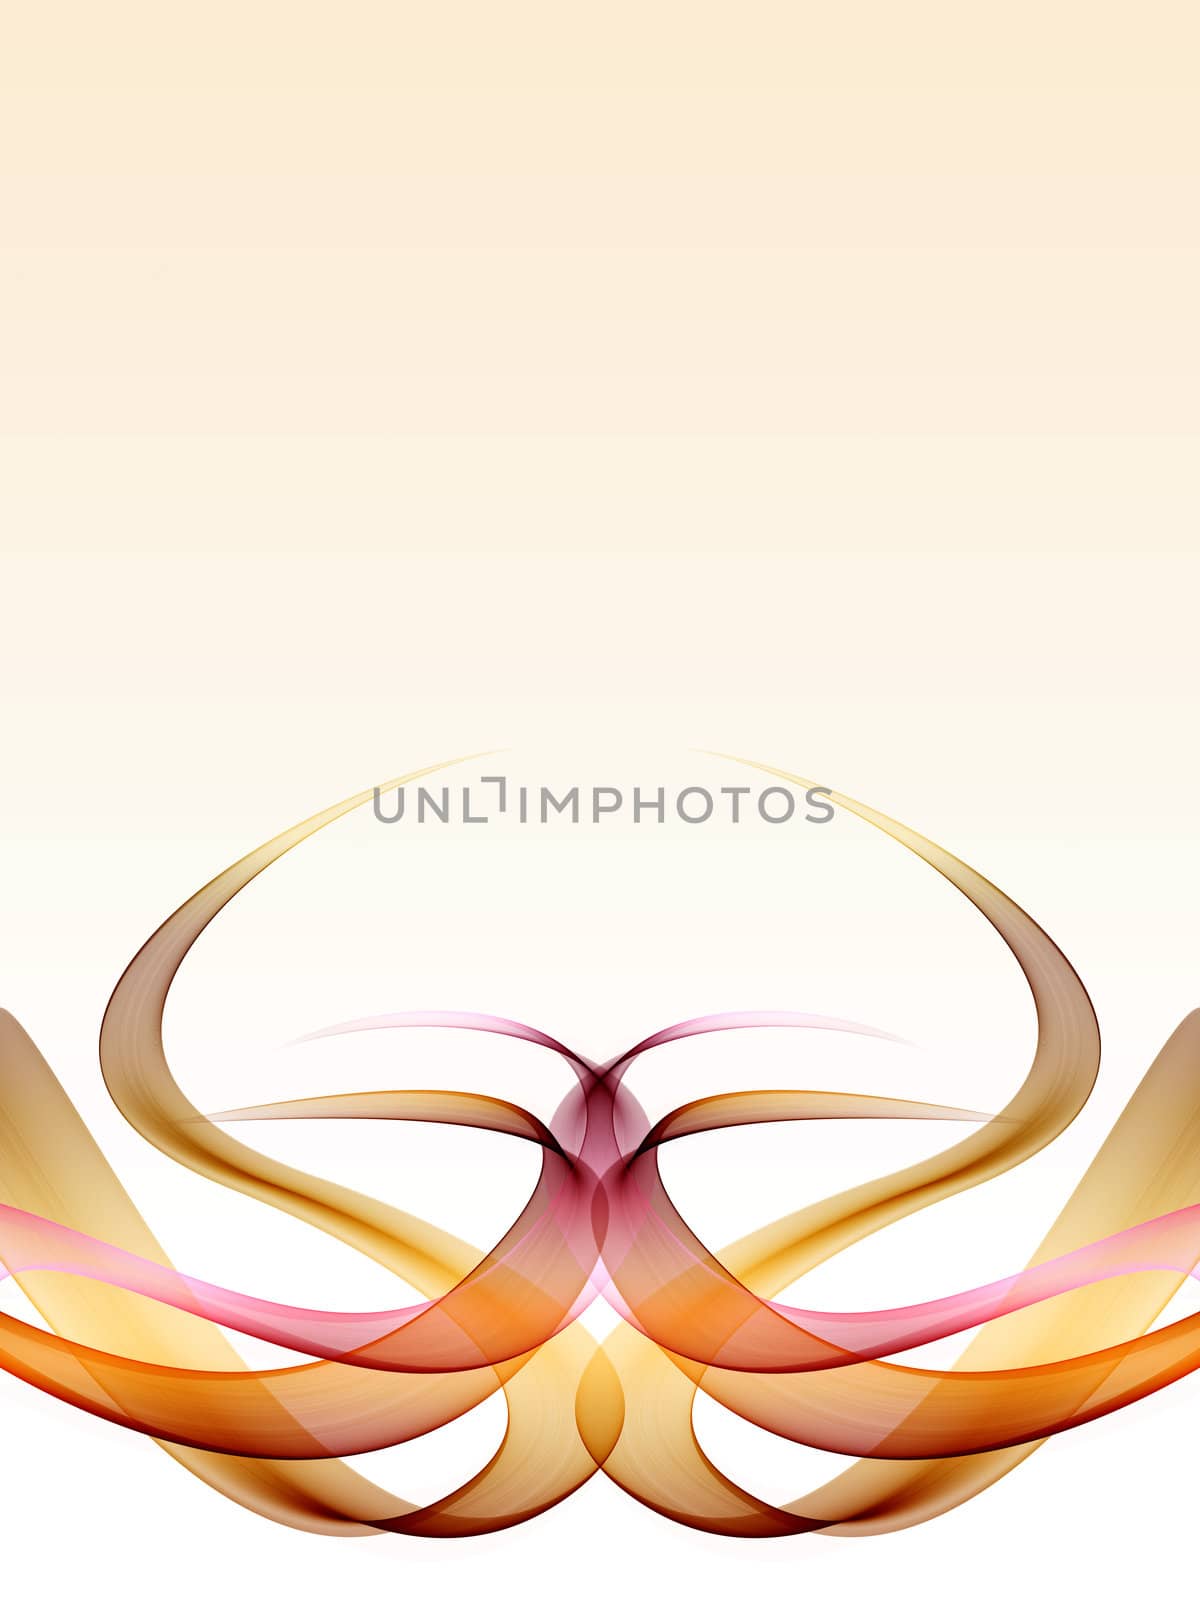 An abstract illustration of symmetric shapes on gradient light purple background